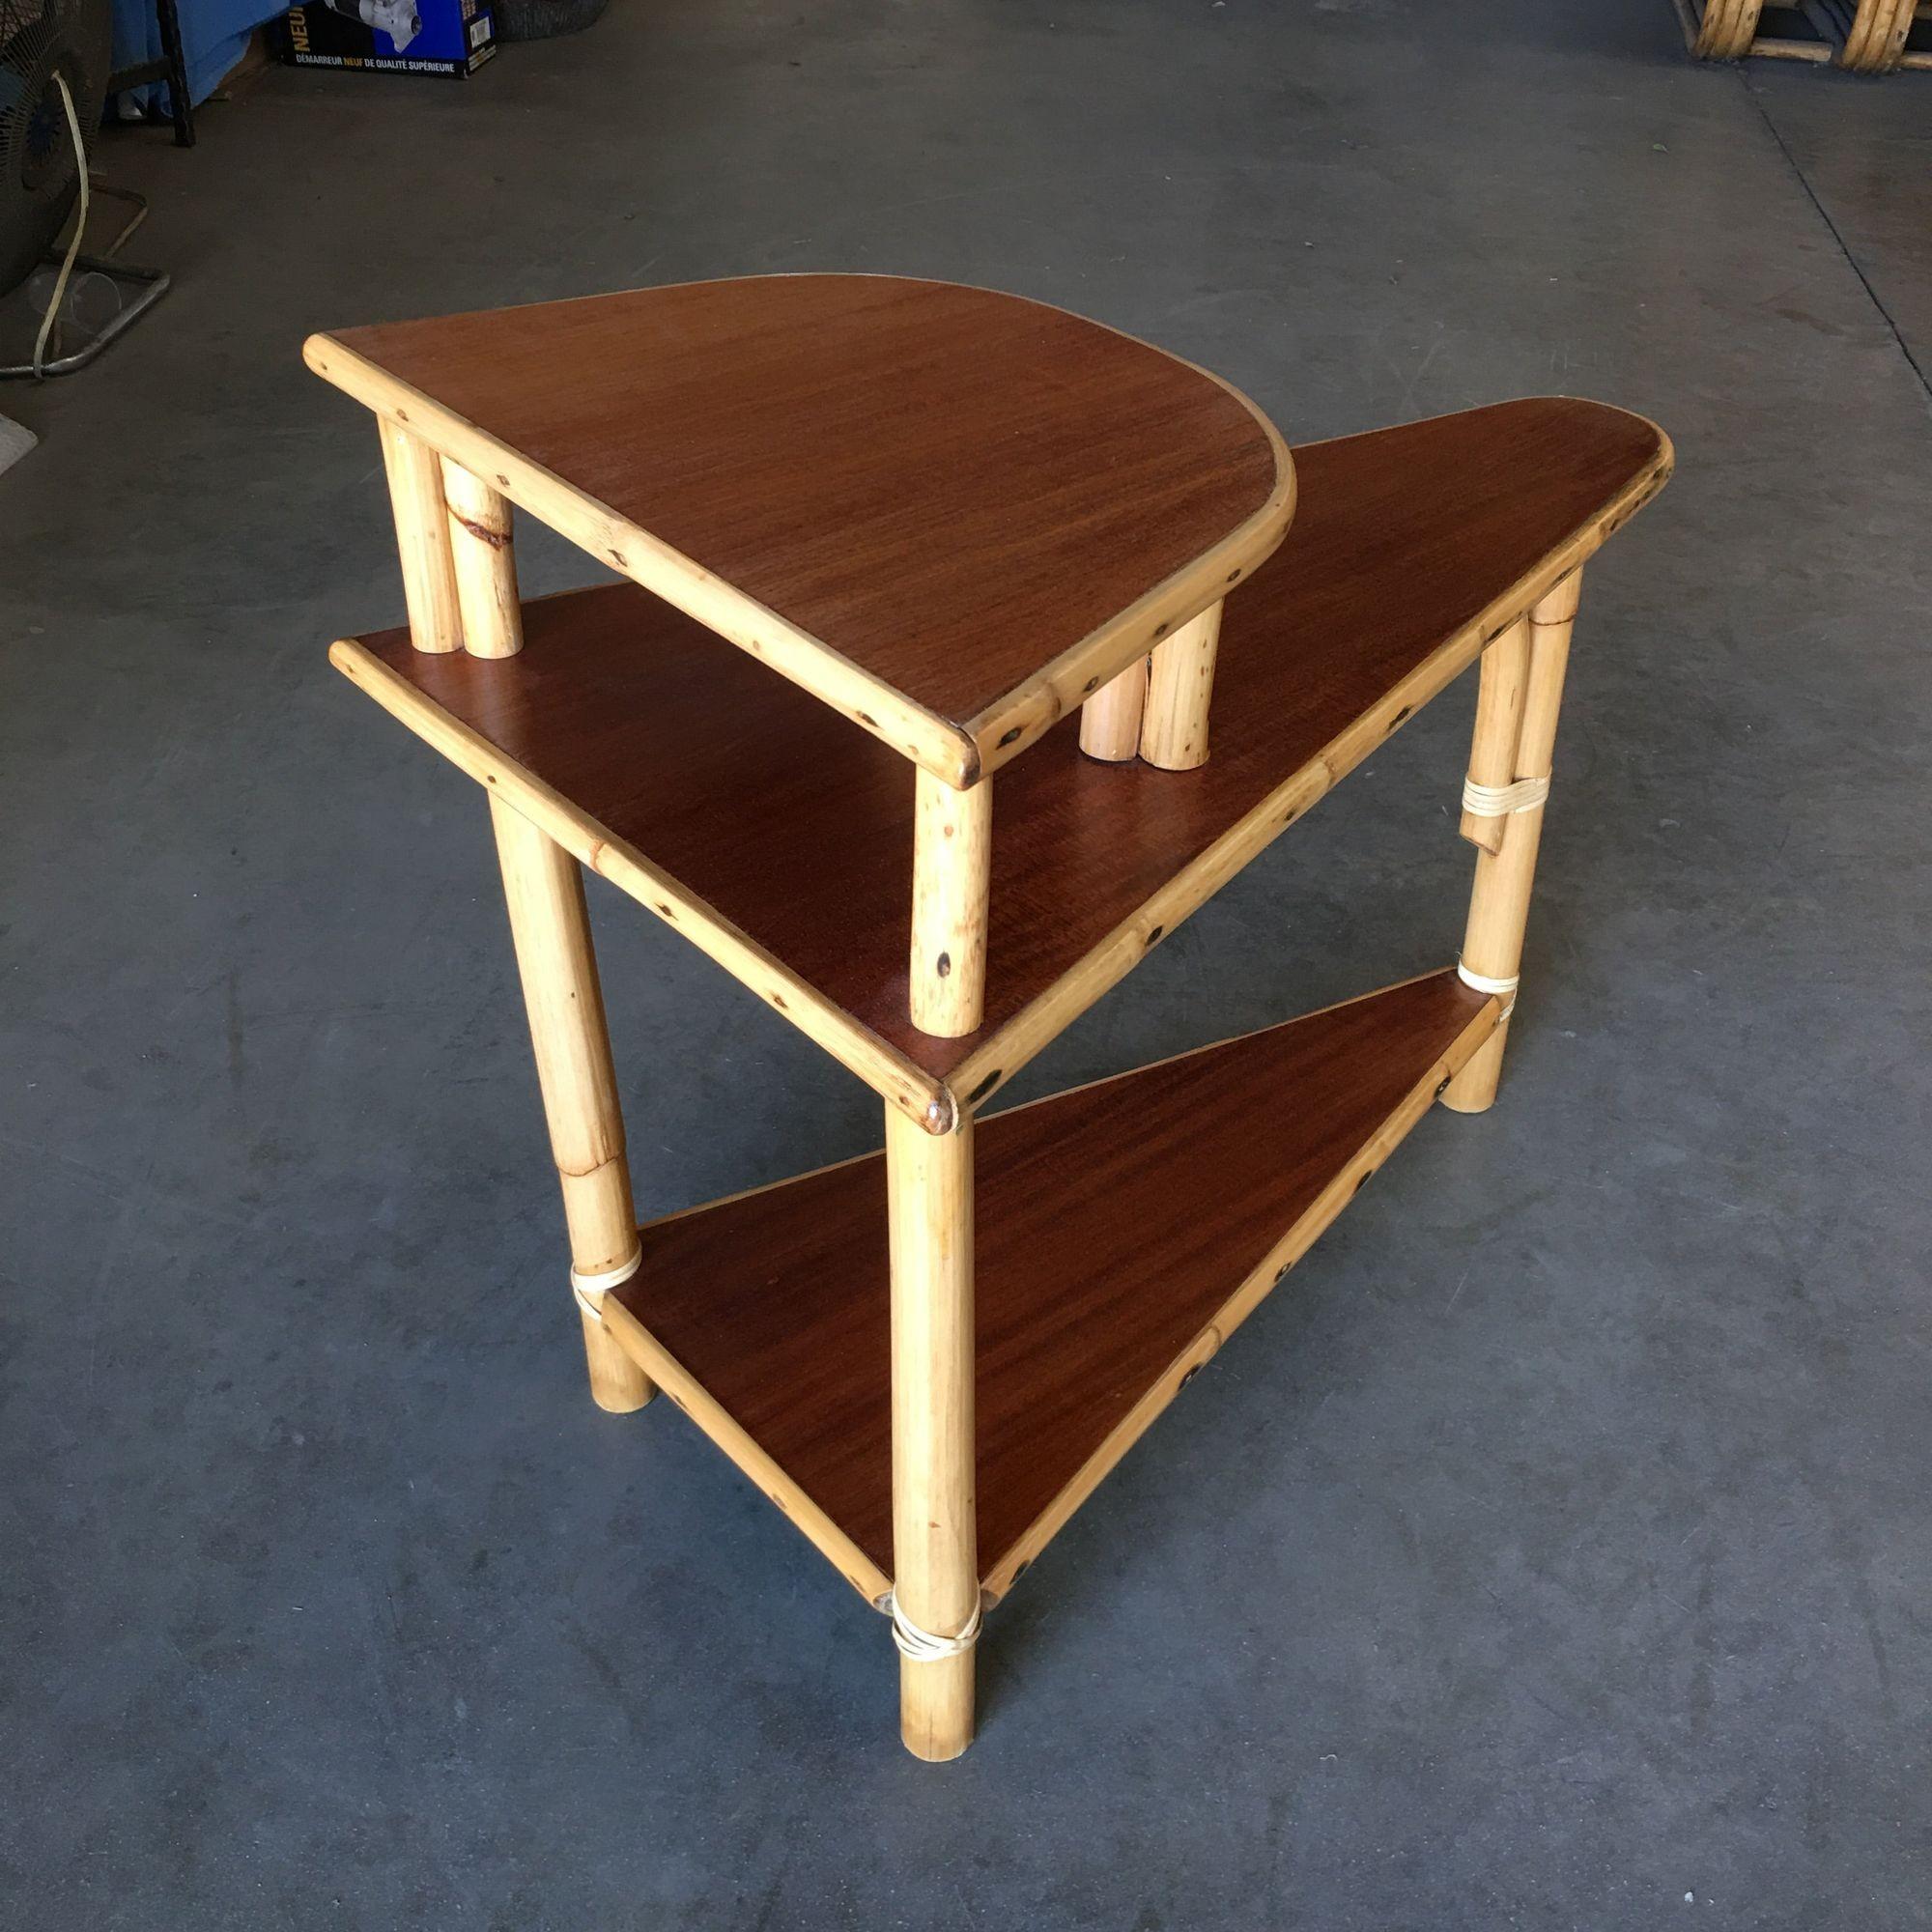 Mid-20th Century Restored 3-Tier Wedge Side Table w/Mahogany Tops For Sale